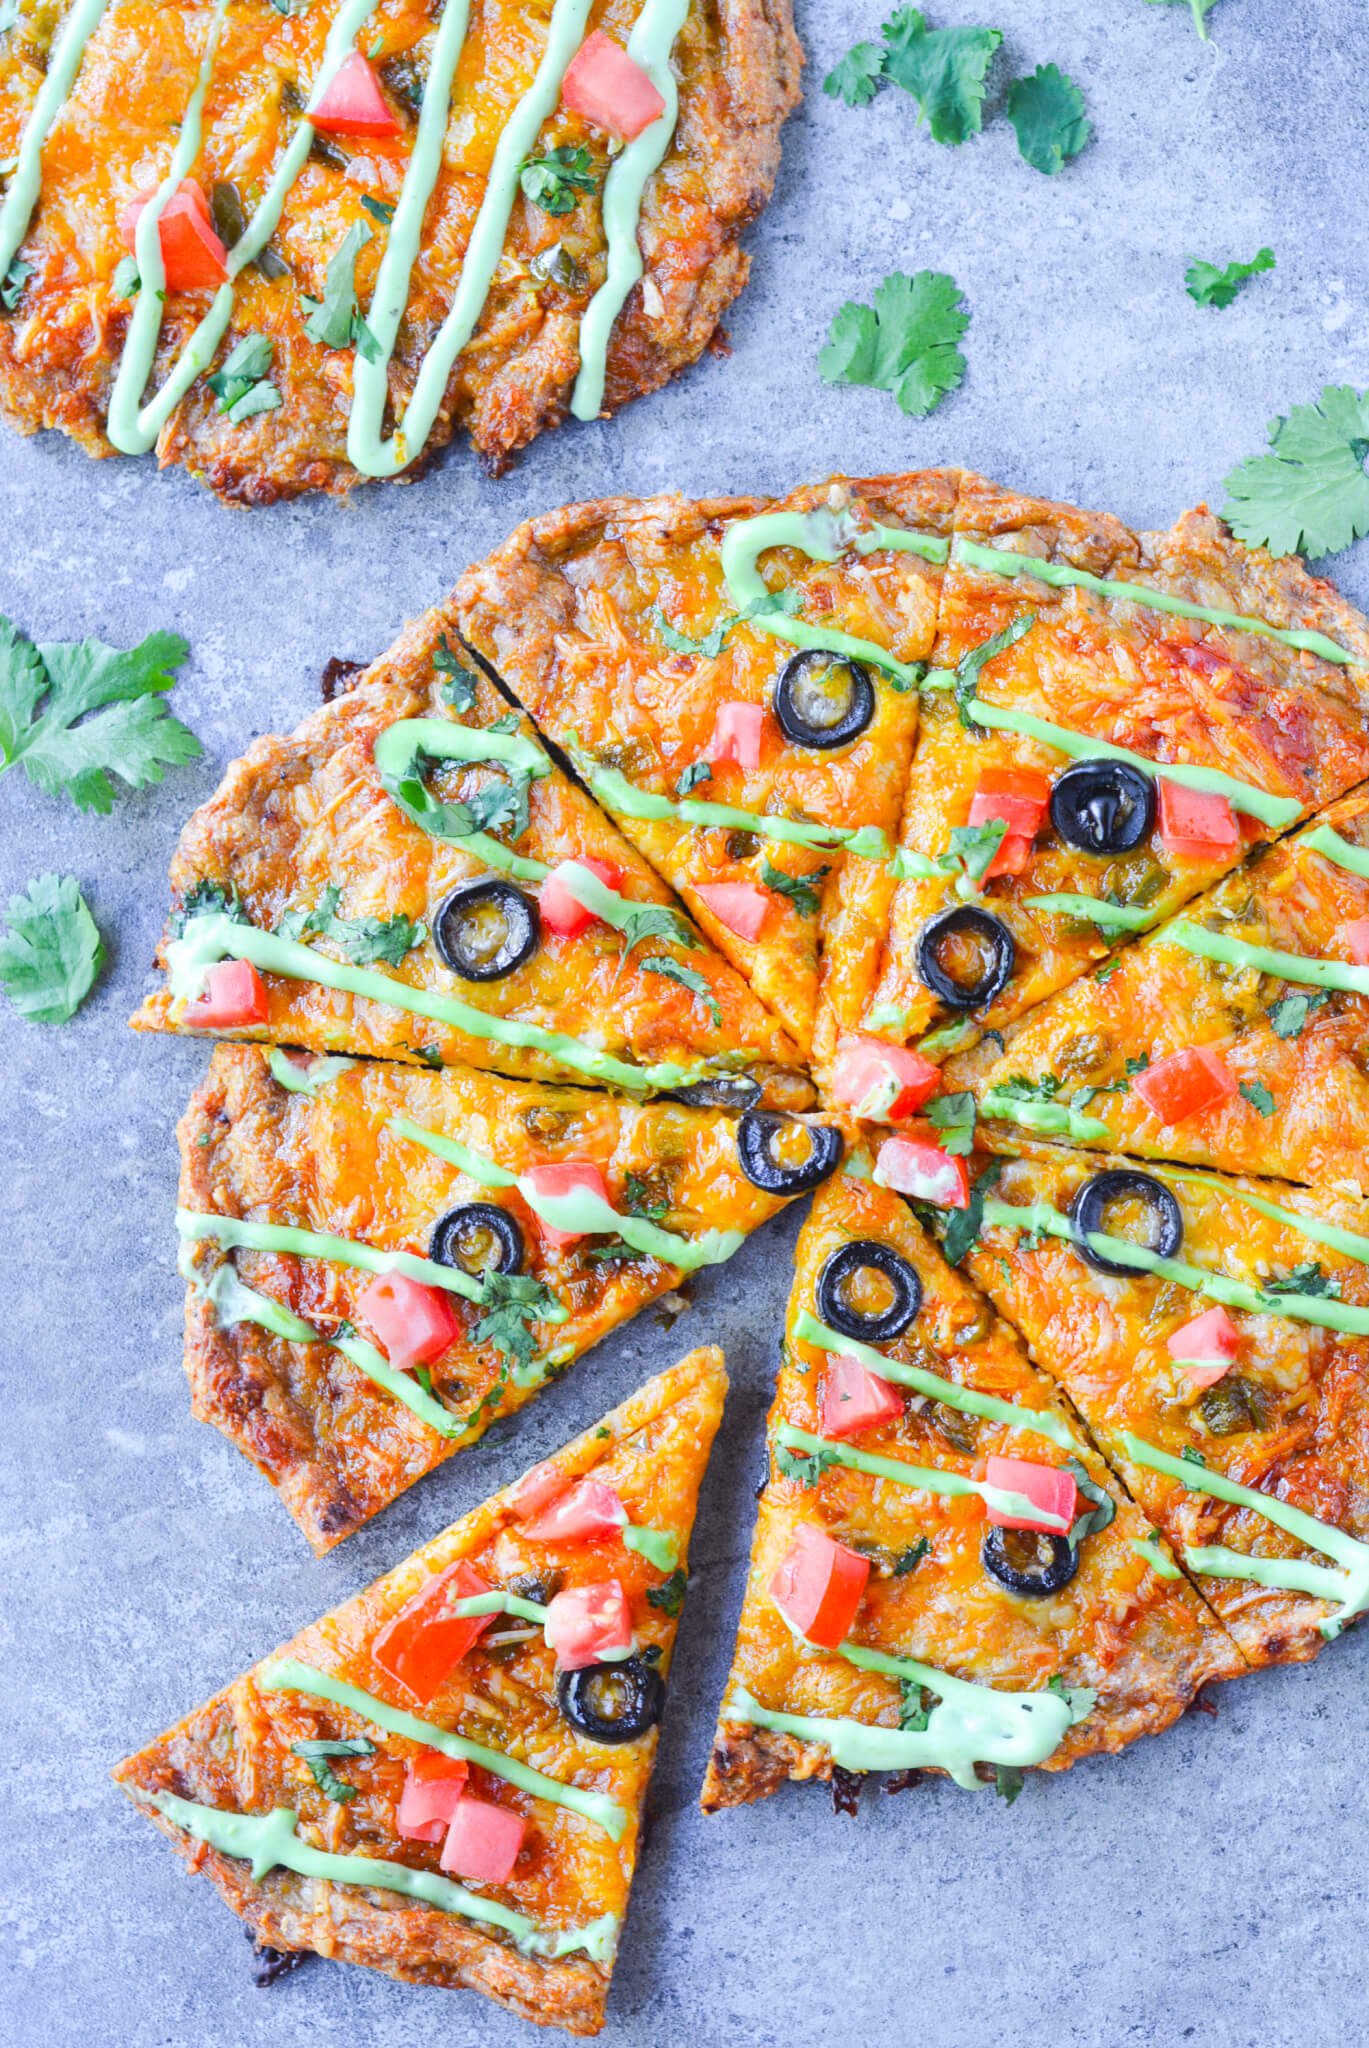 This amazing keto chicken crust taco pizza has only 2g net carbs!!! Low carb and gluten free!